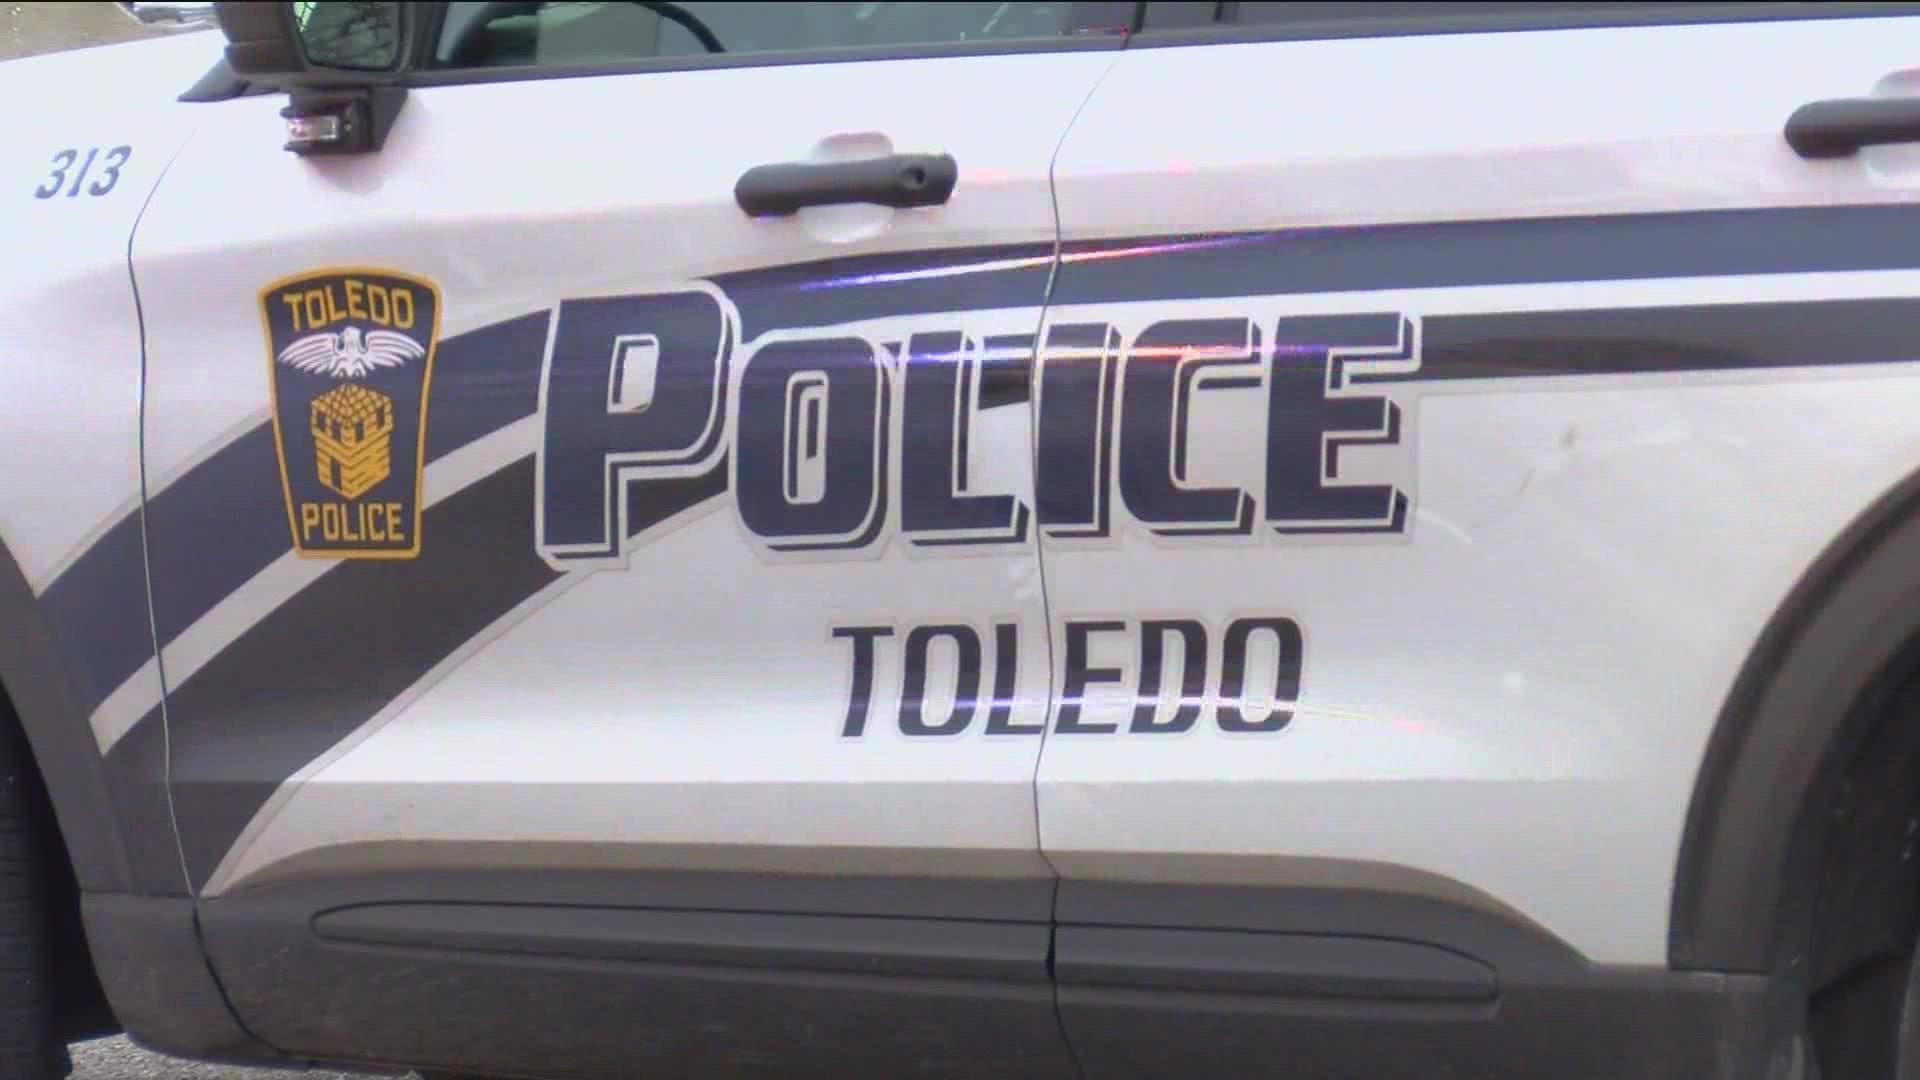 WTOL 11 compared burglary, robbery and other crime data from 2022 to previous years to determine whether or not crime is truly decreasing in Toledo.